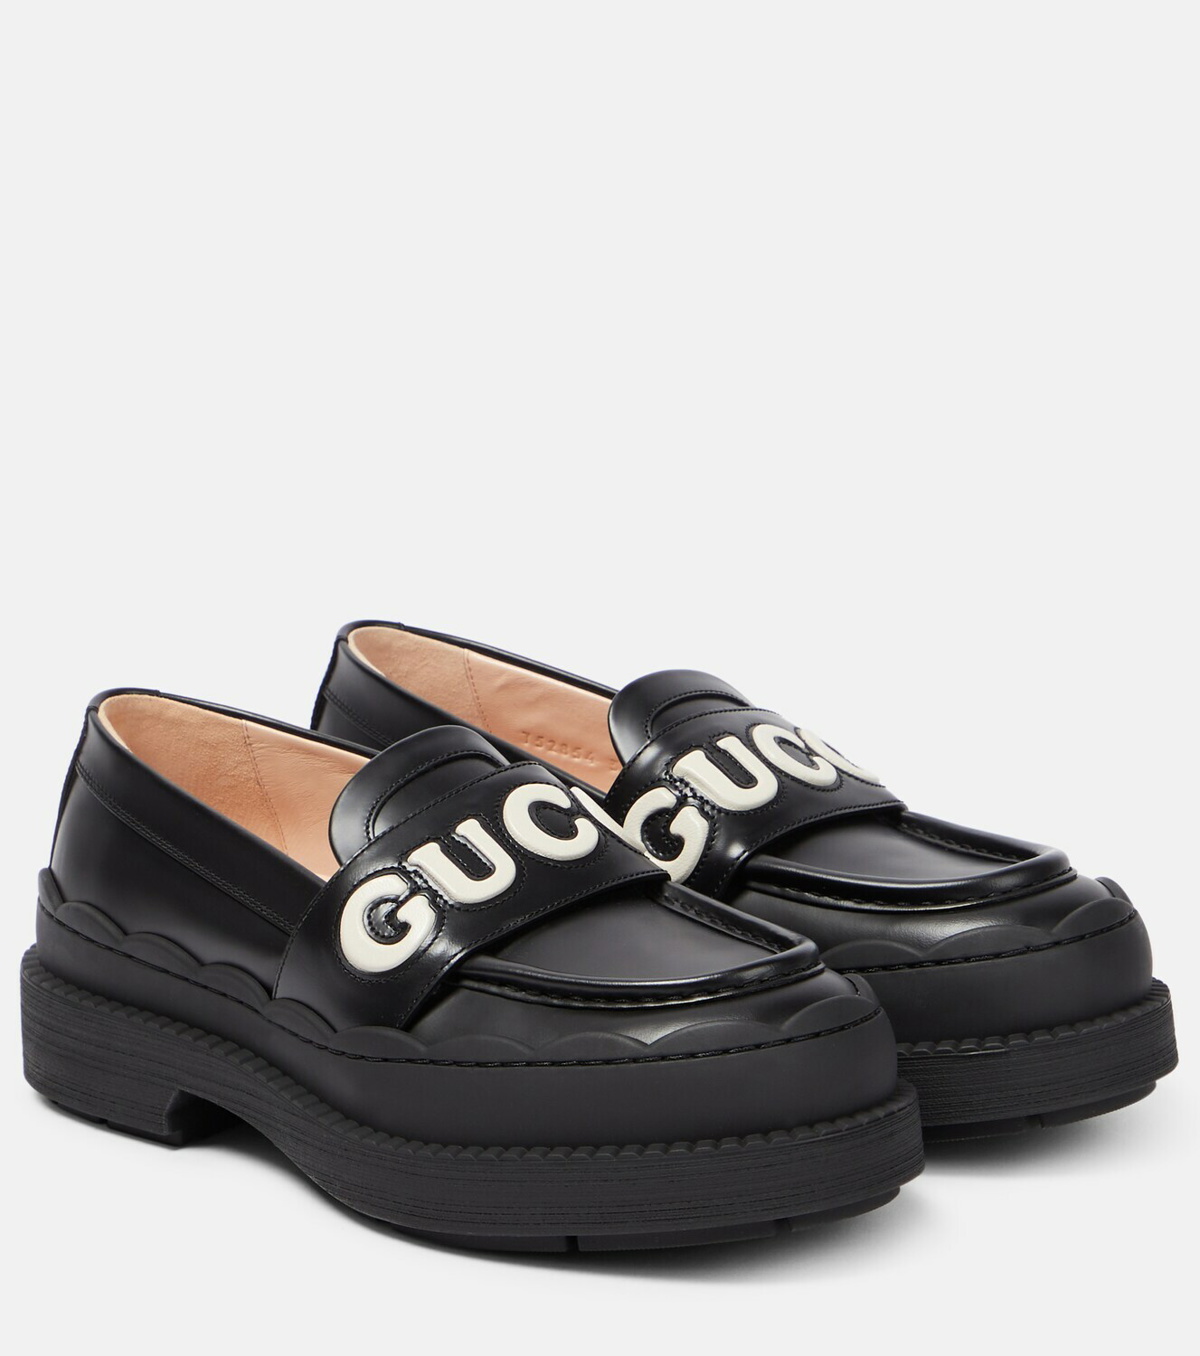 Gucci Sylvie Gold Tone Chain Loafers Black Leather